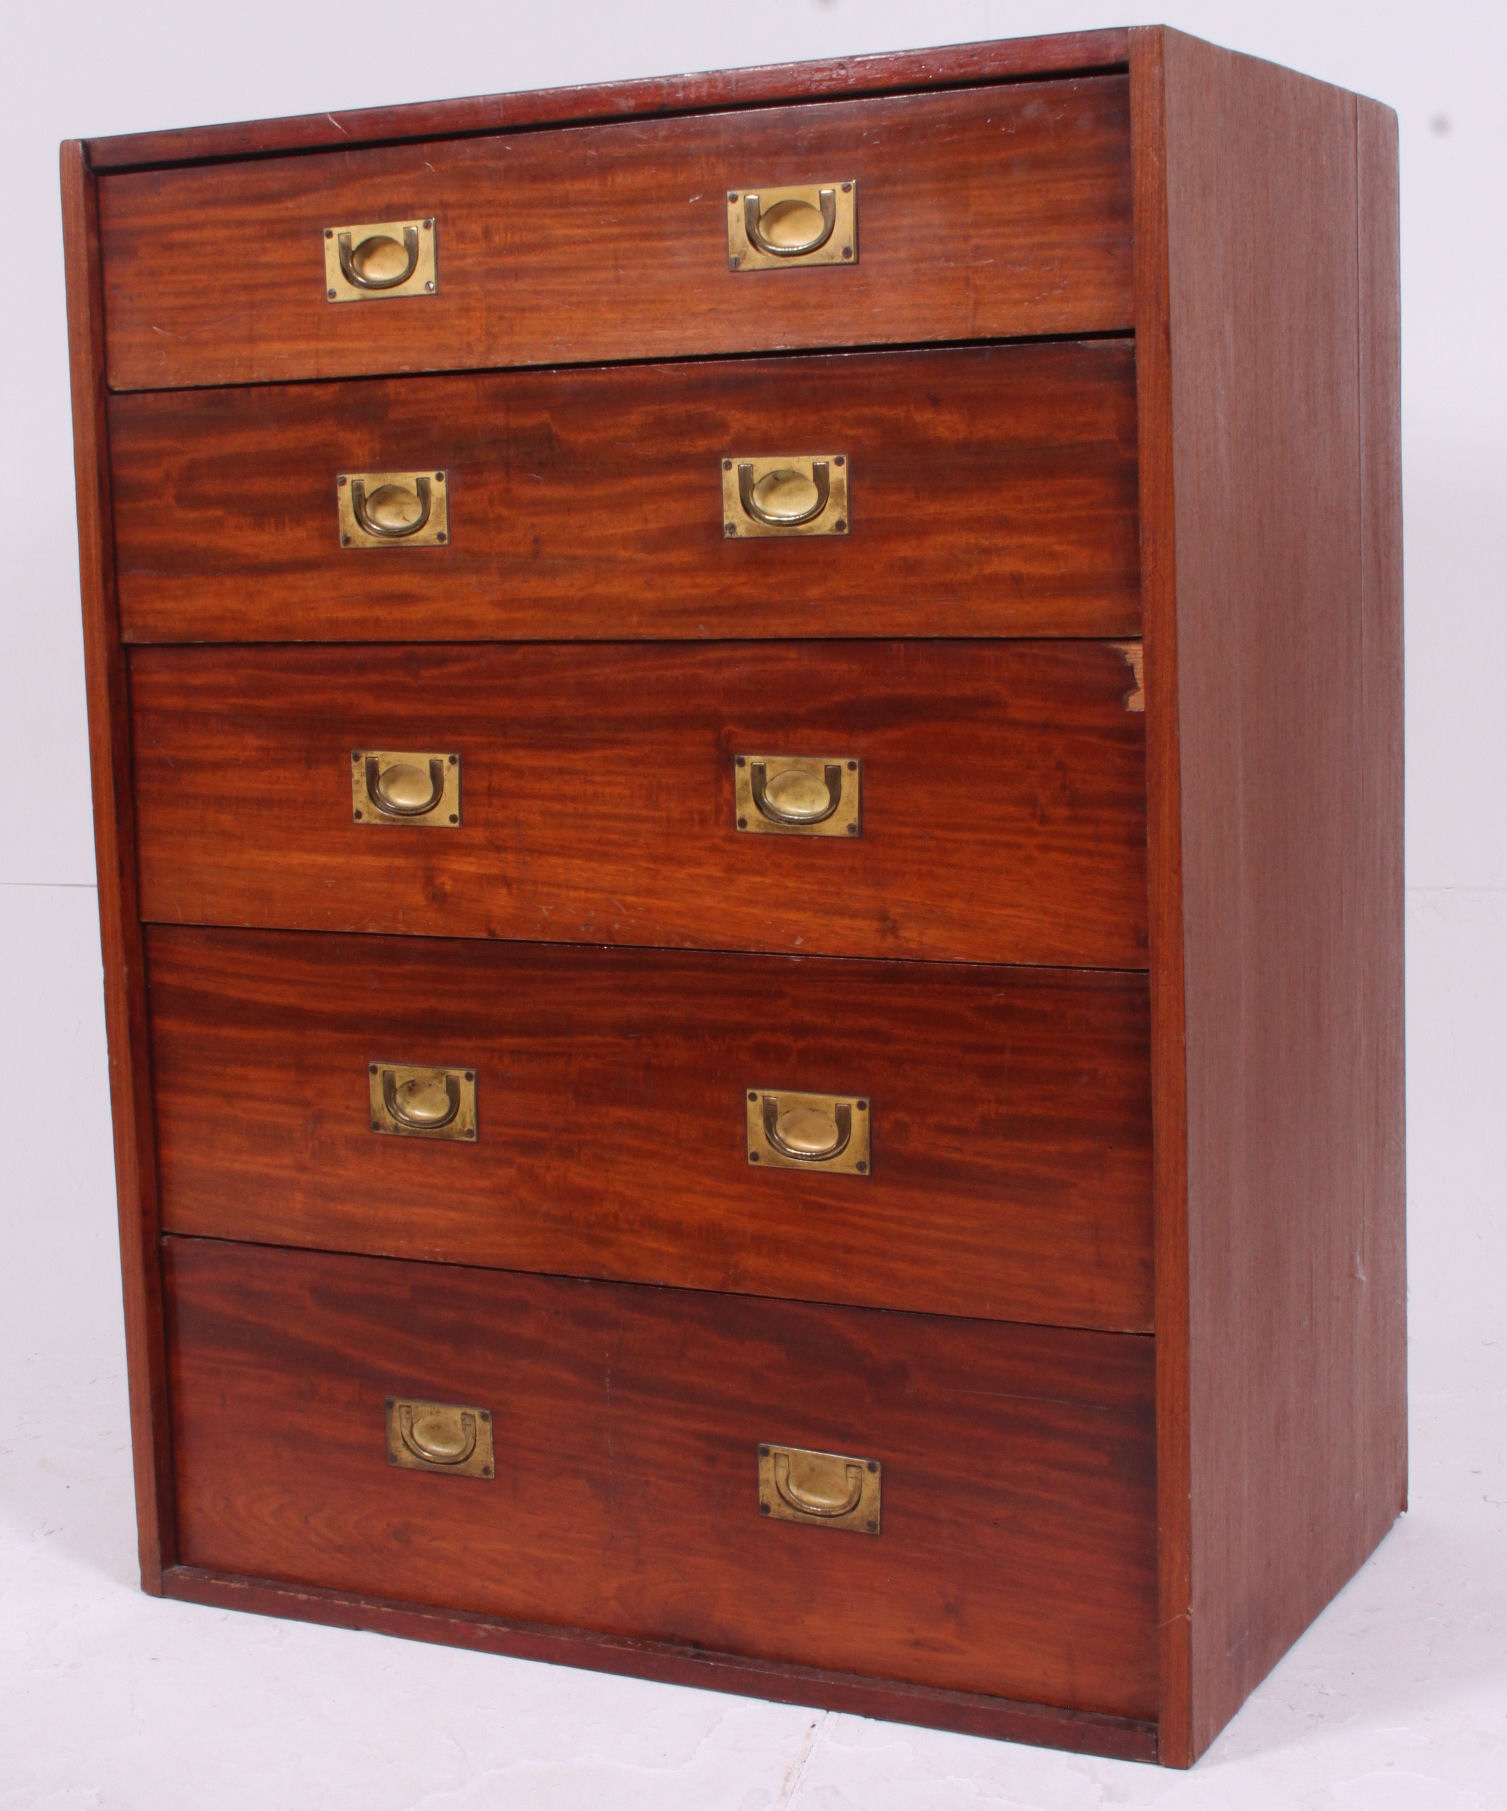 A good quality 1940's teak wood campaign style chest of drawers.